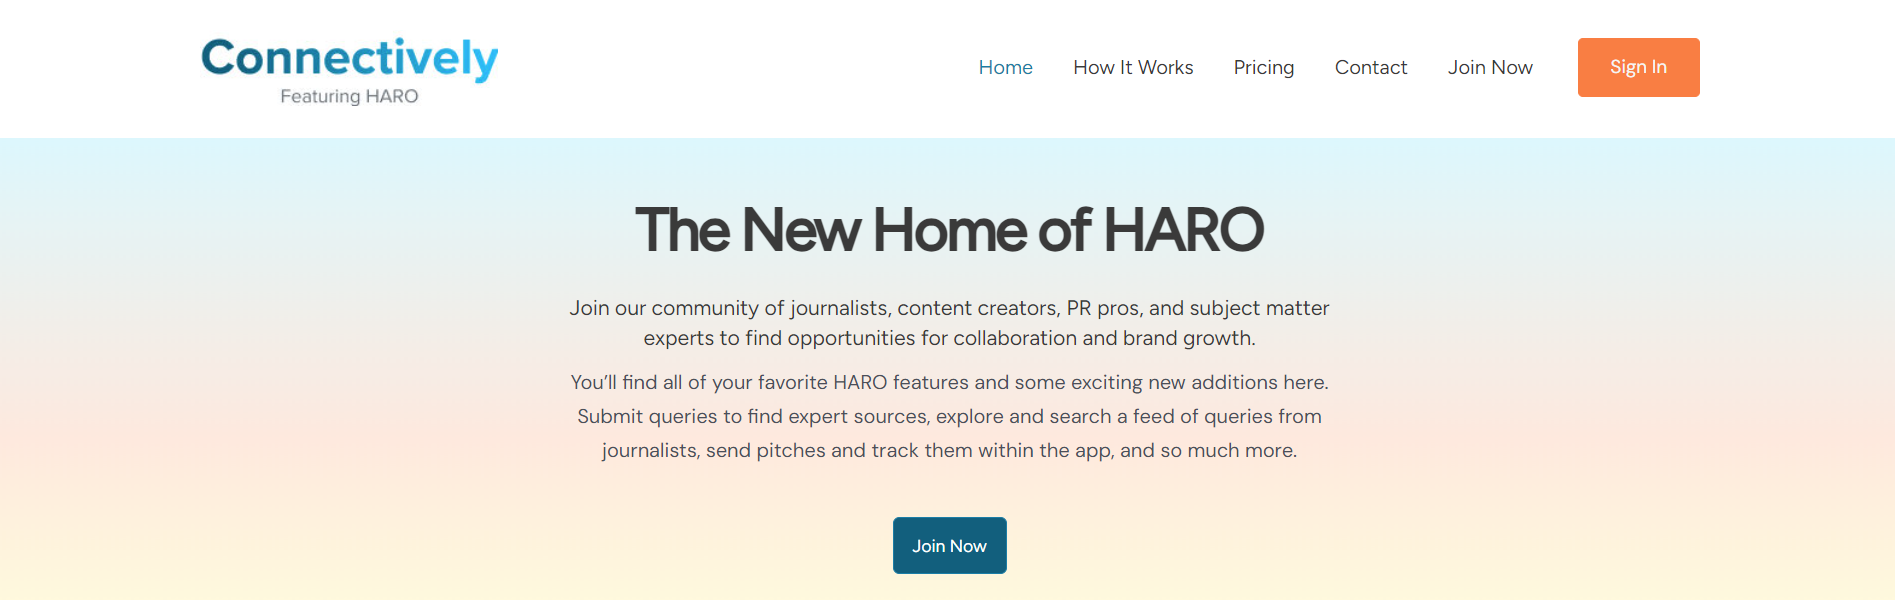 HARO Sign Up Page